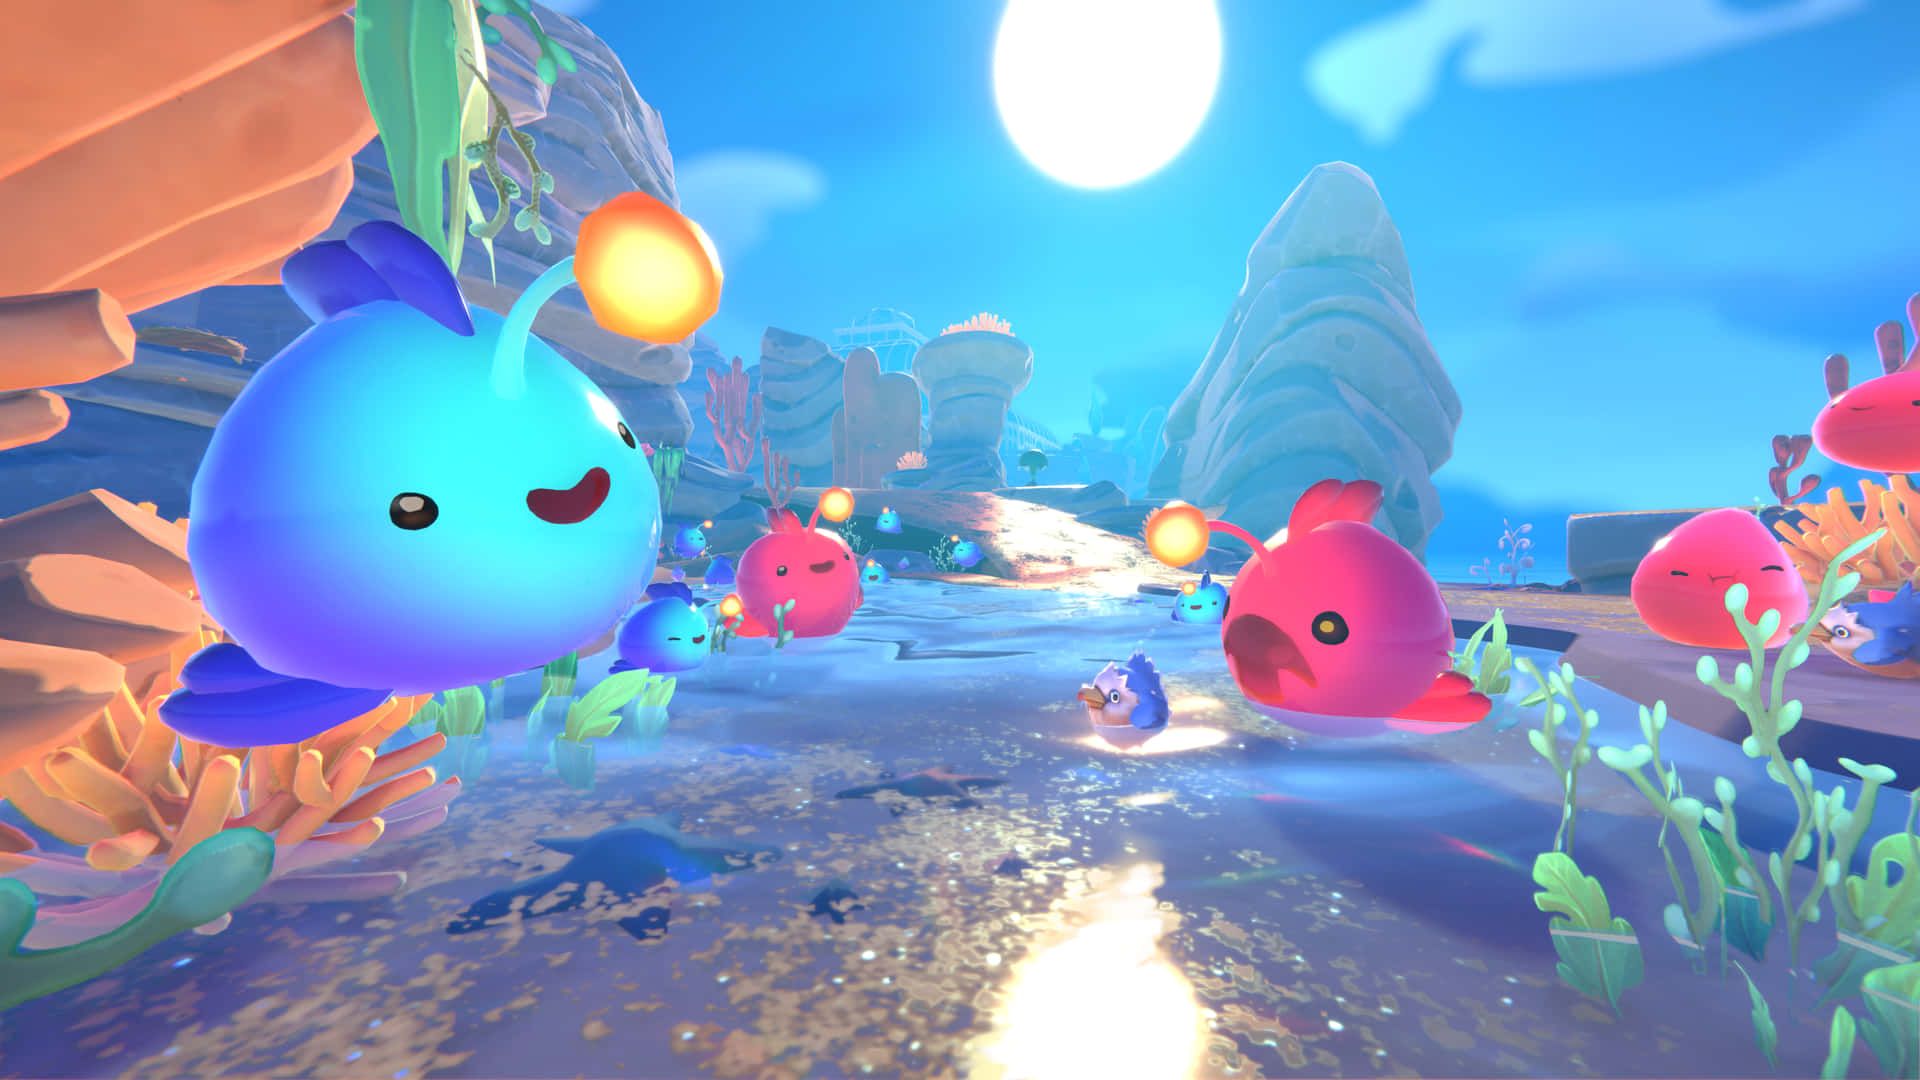 Download Live and explore a world of slimes in Slime Rancher! Wallpaper